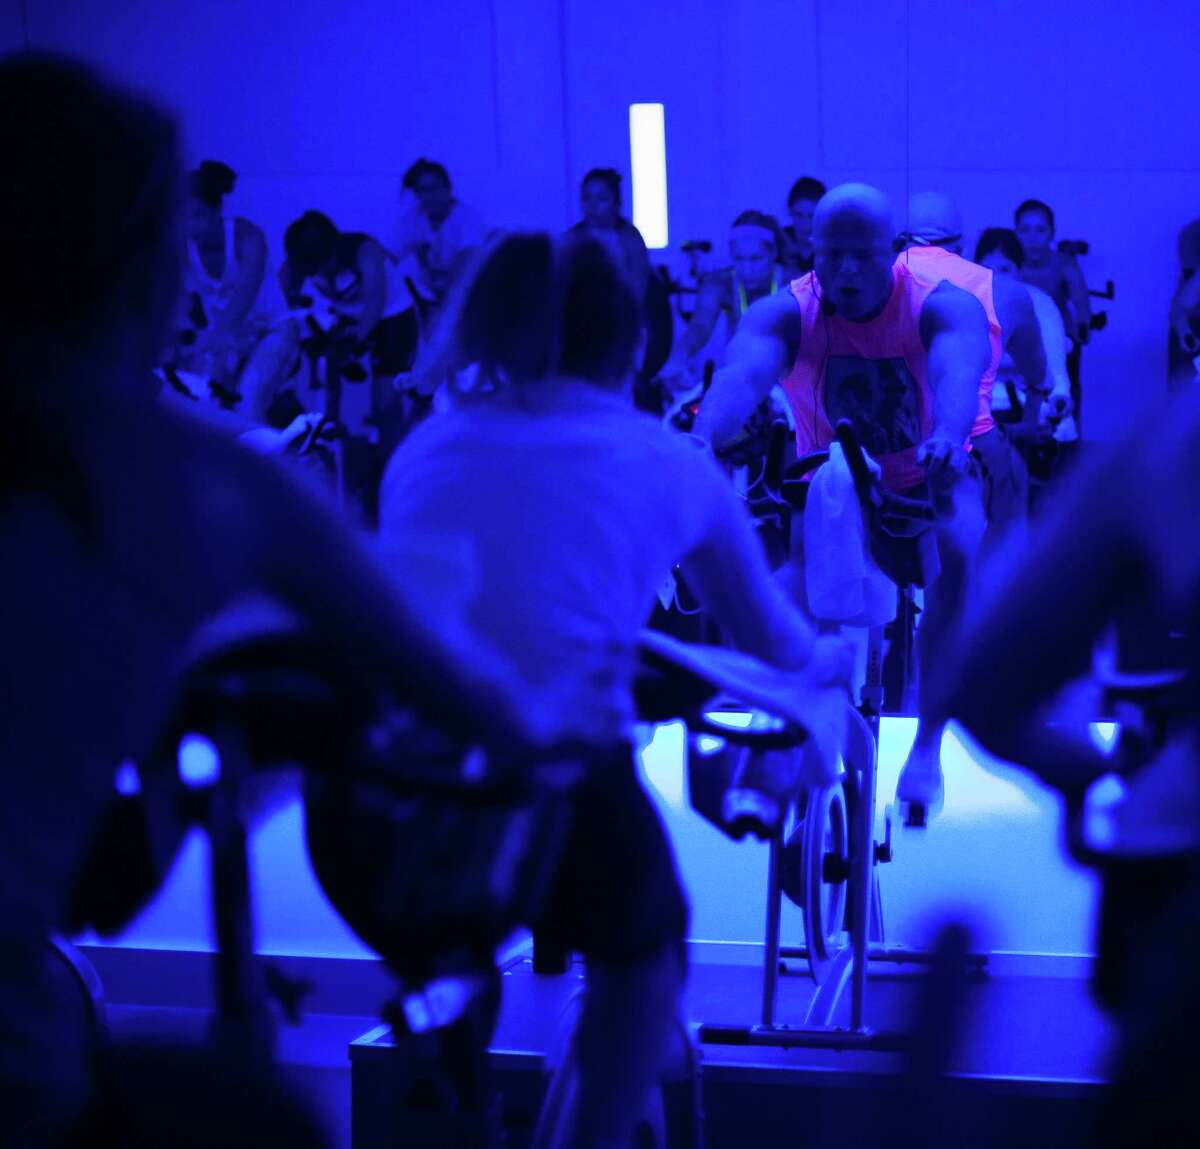 Will Longoria, an instructor at RIDE, leads a Rihanna and Justin Timberlake themed indoor cycling excercise class at RIDE Indoor Cylcing Studio in the Heights